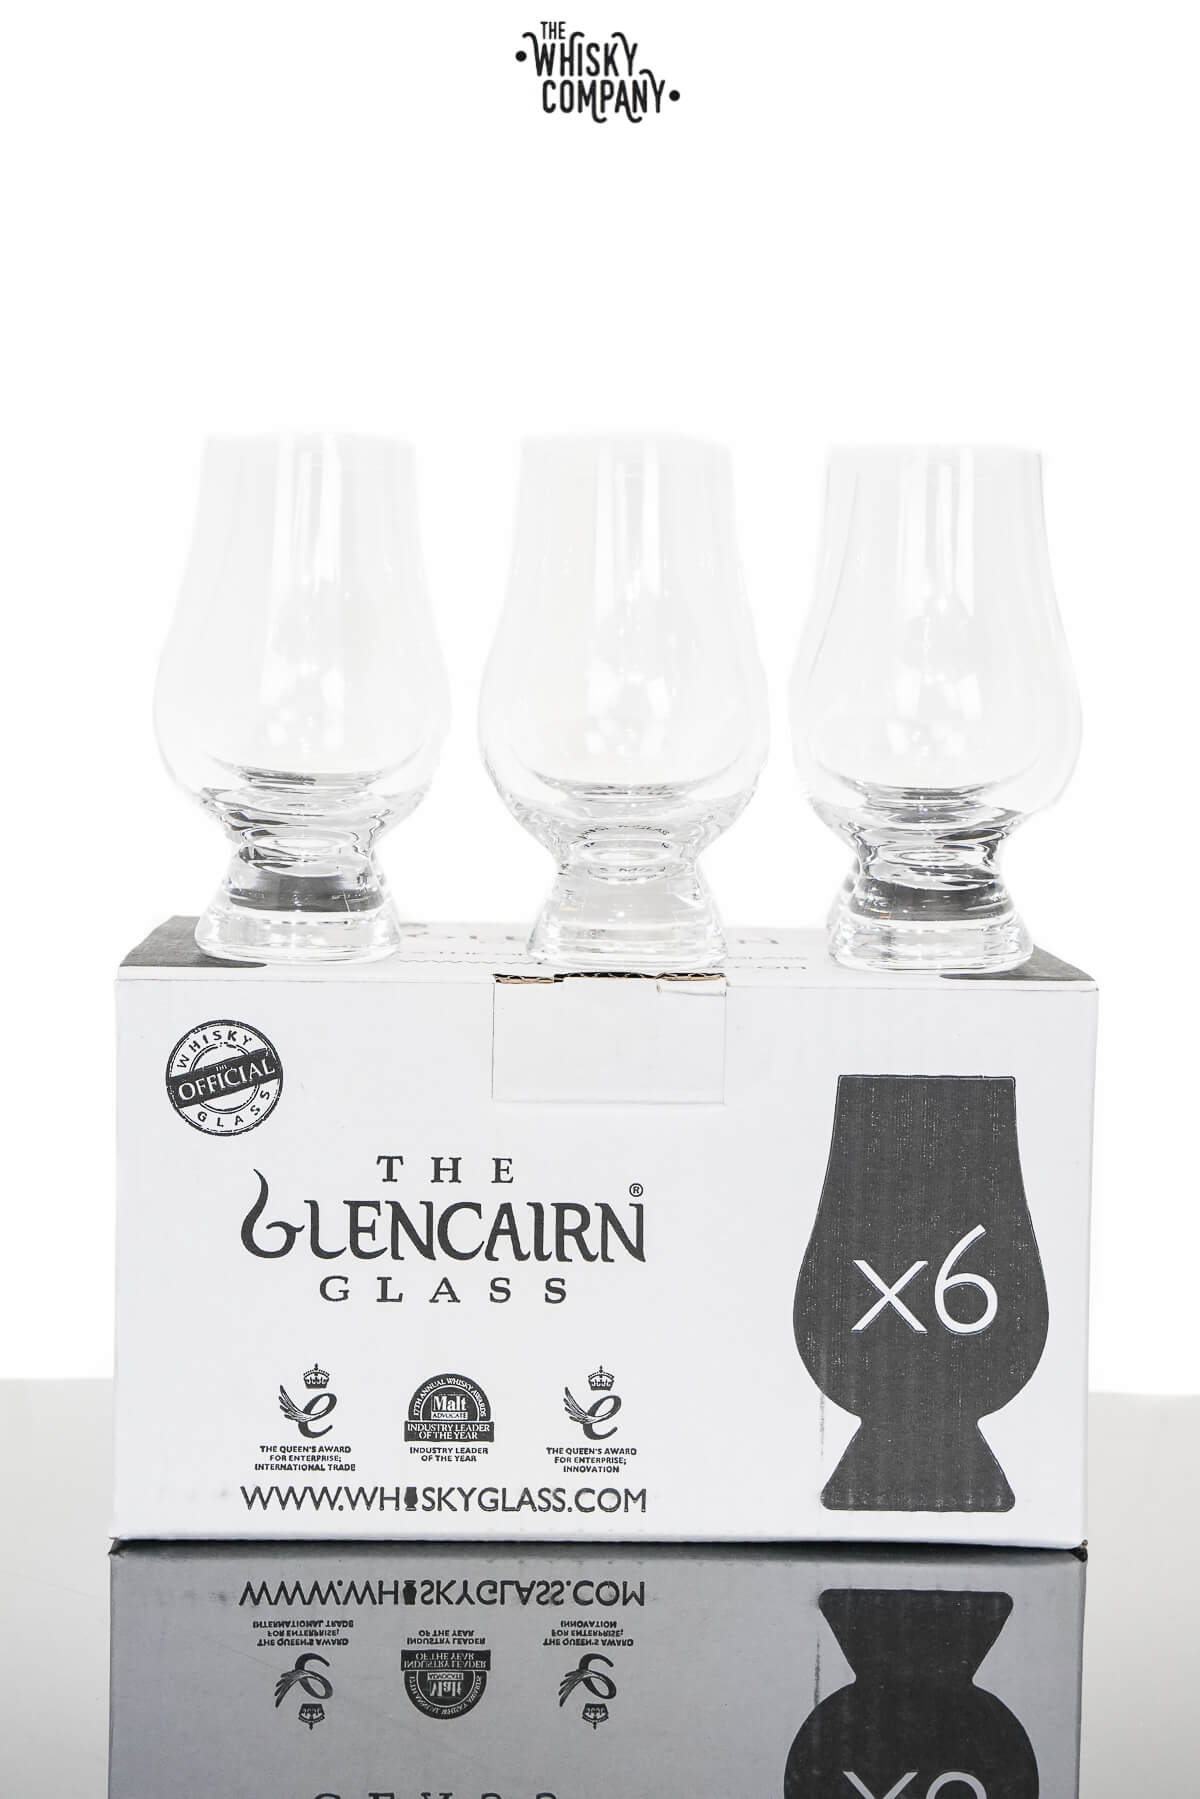 https://www.thewhiskycompany.com.au/wp-content/uploads/2020/12/the_whisky_company_glencairn_crystal_glassware_whisky_tasting_glass_six_glass_purchase.jpg